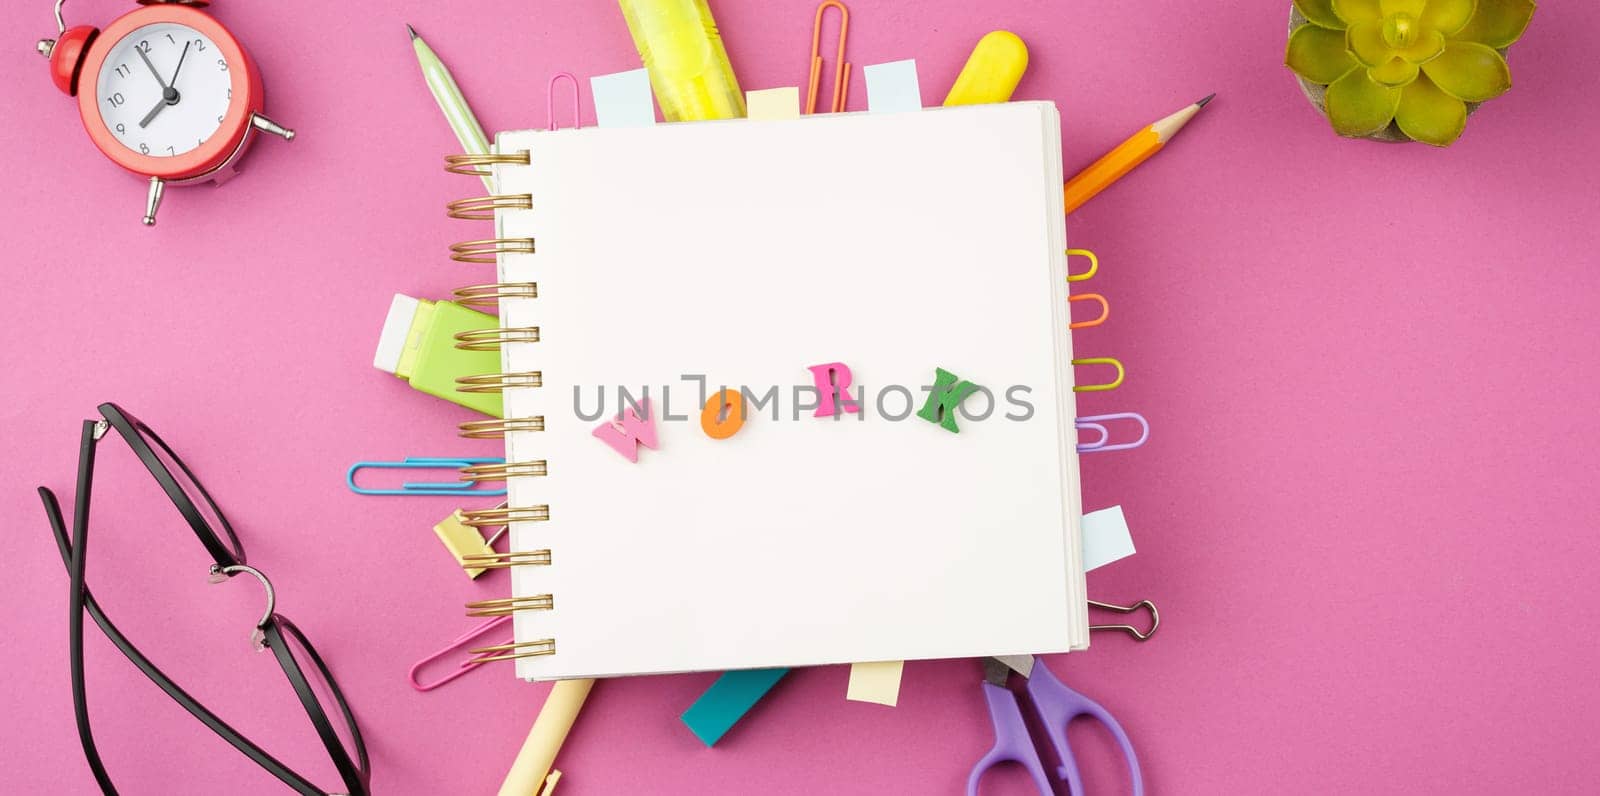 Open spiral notebook with bookmarks from paper clips and leaves for notes, pencil, scissors, binders, alarm clock, glasses on a pink background. Top view. Stationery concept. Office tools.